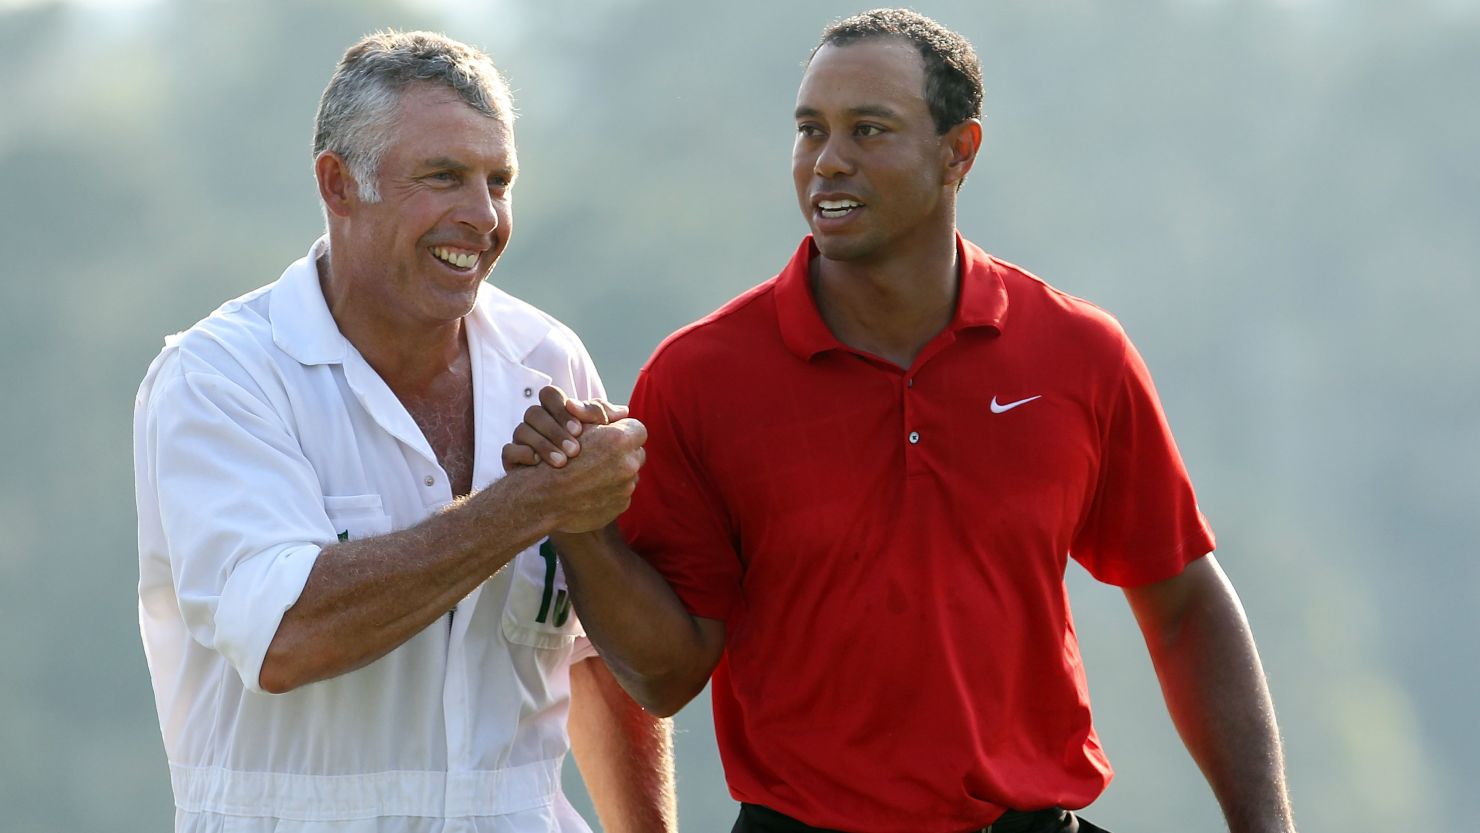 Tiger Woods (right) with caddie Steve Williams during the 2011 Masters on April 10, 2011 in Augusta, Georgia.